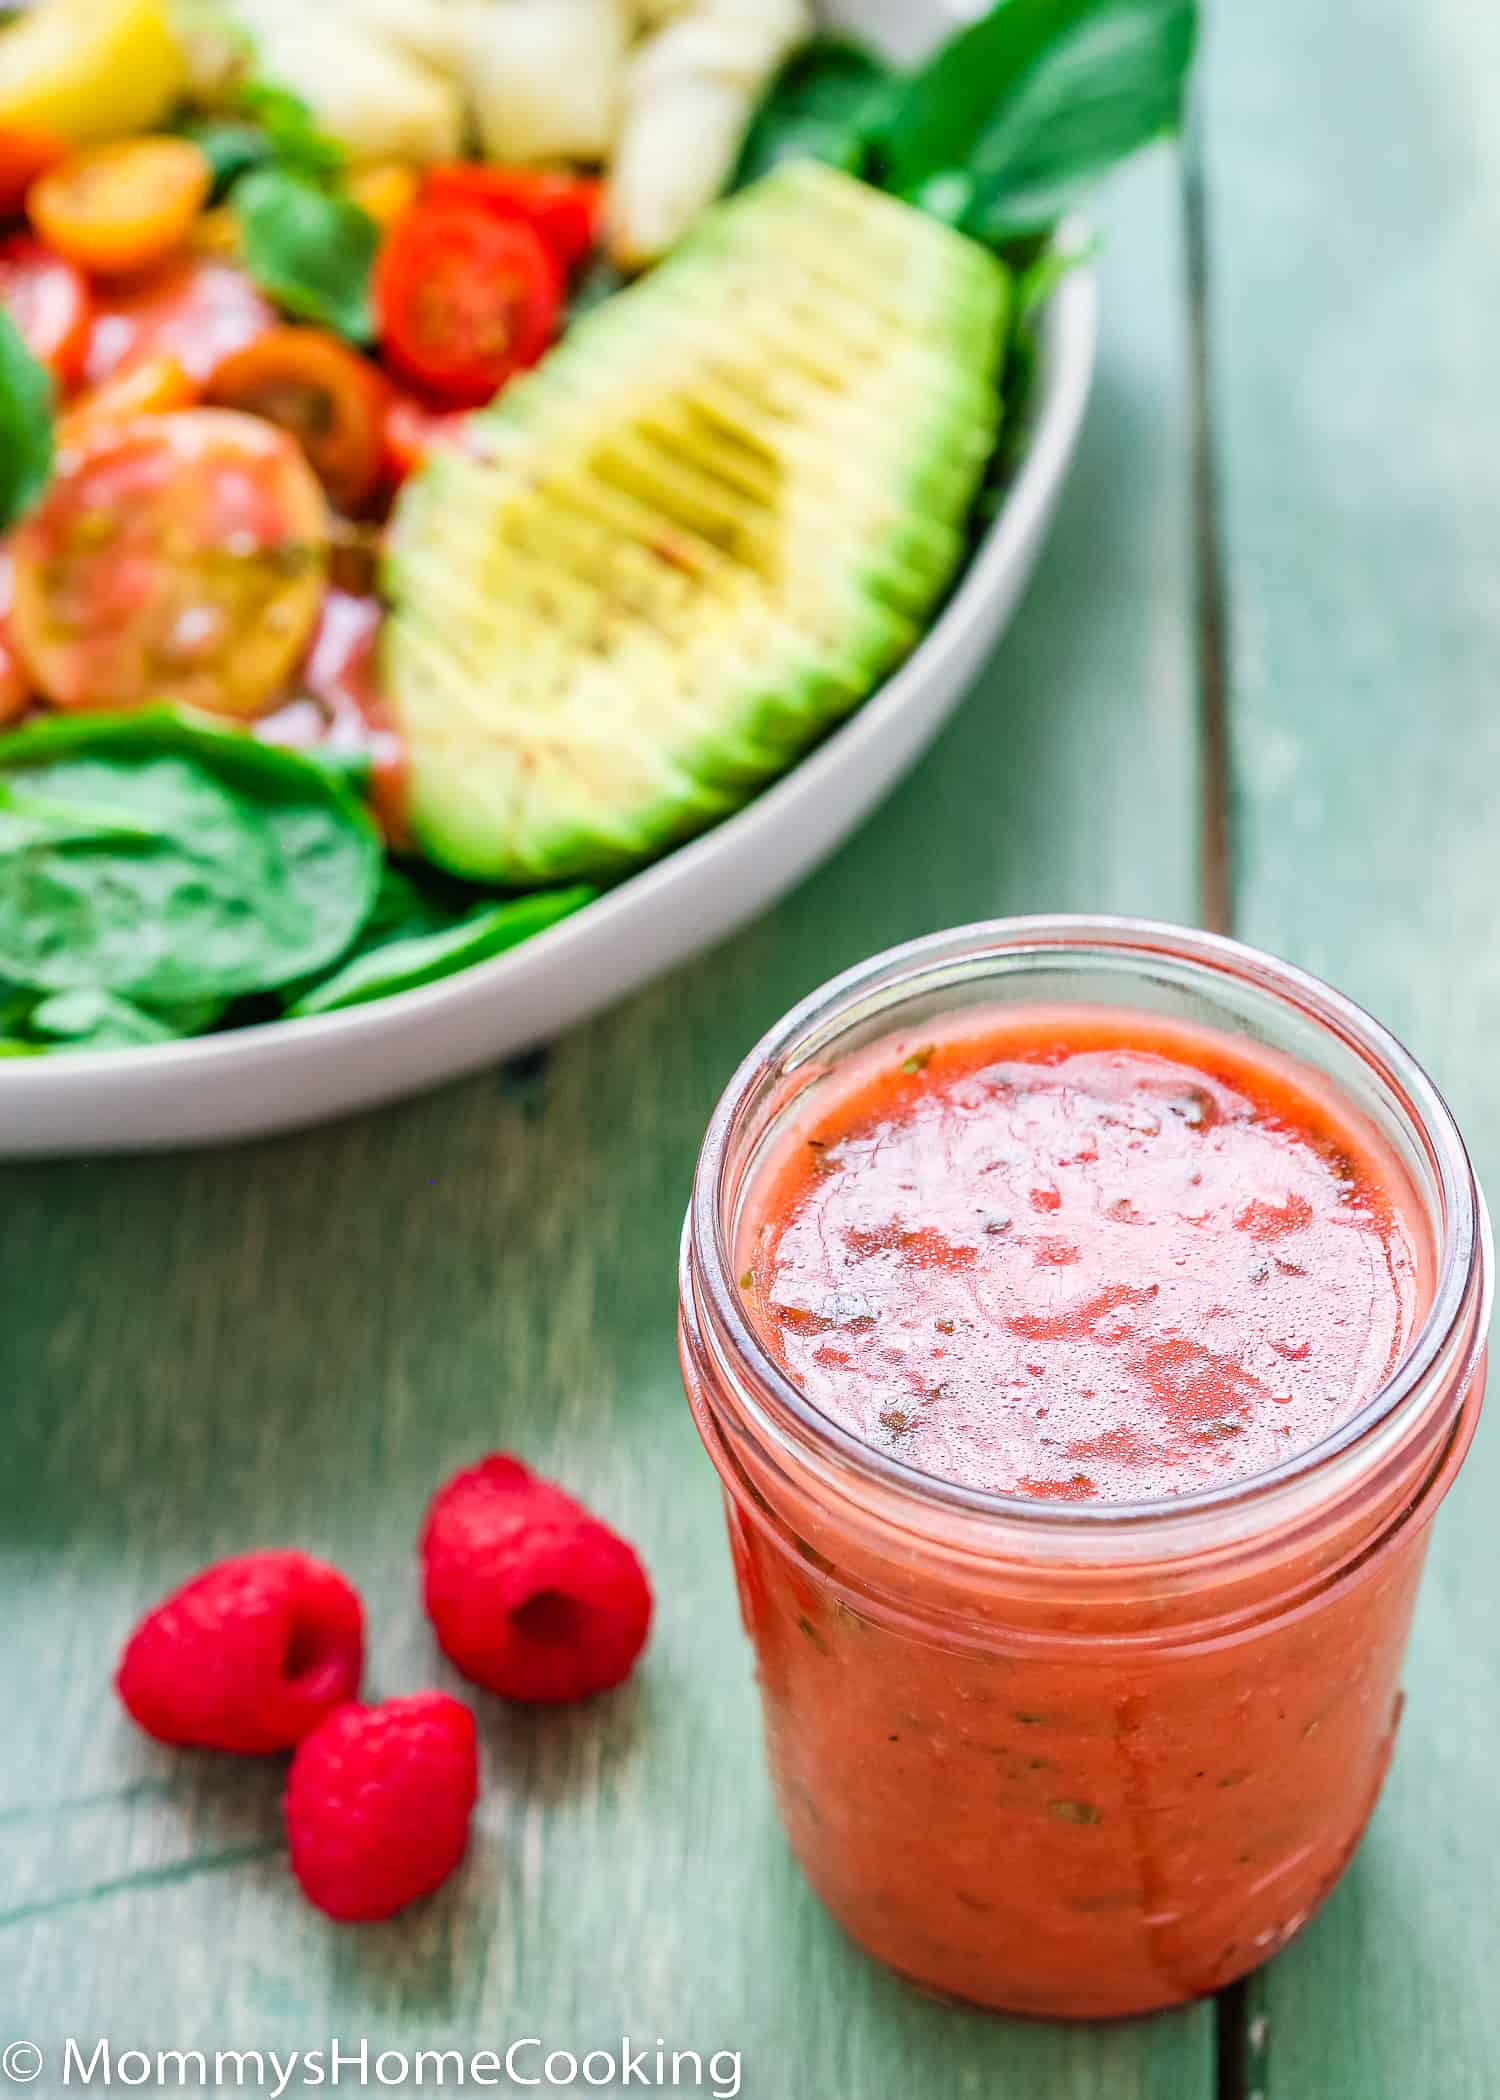 Raspberry Vinaigrette in a glass jar with fresh raspberries on the side and a salad in the background over a green surface.